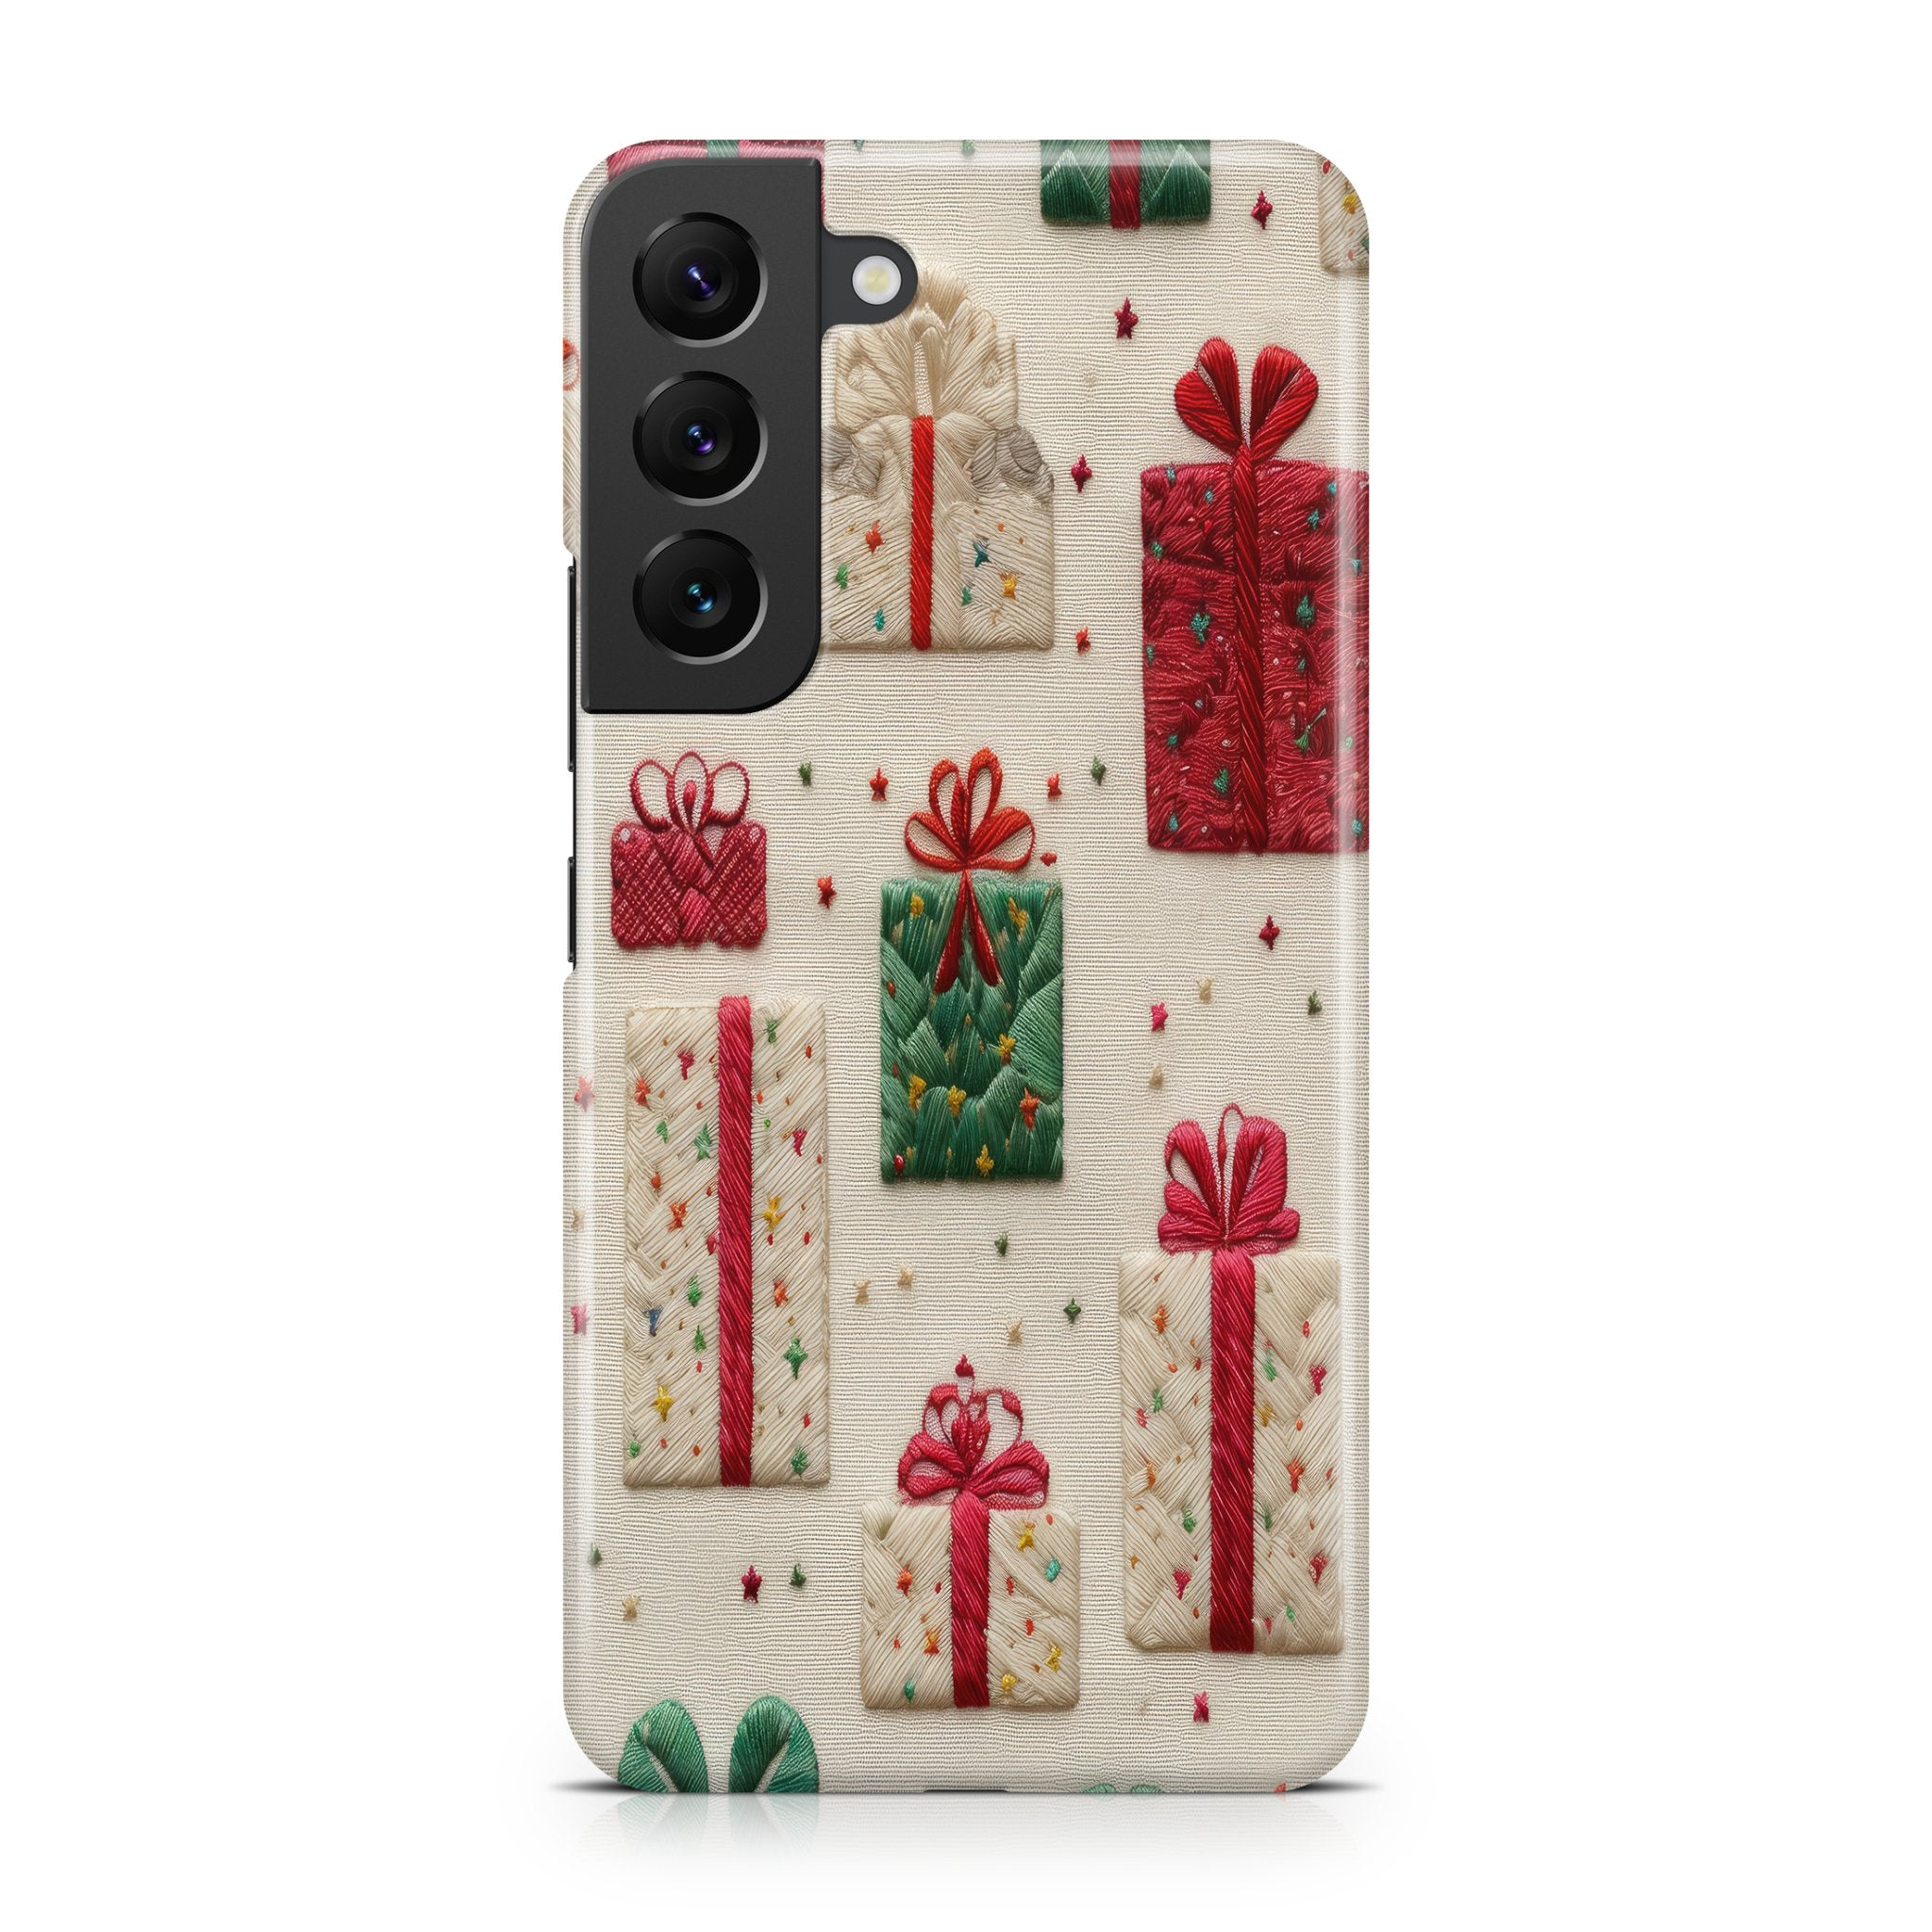 Christmas Presents - Samsung phone case designs by CaseSwagger